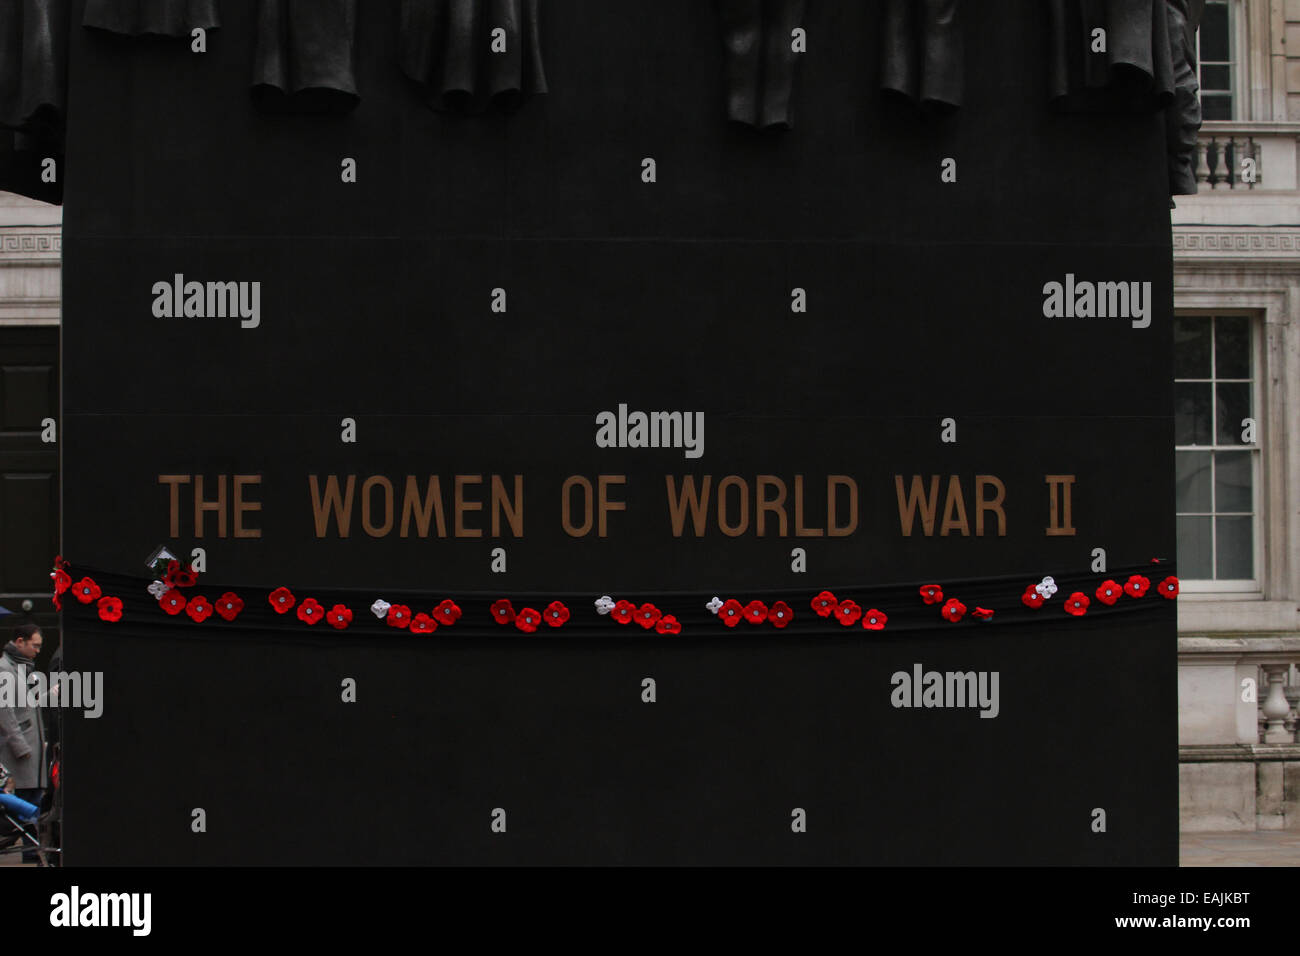 London, UK 16 November 2014. The Women of World War II memorial laced with poppies during the  Jewish community in London attend a Remembrance Parade. Photo: David Mbiyu/ Alamy Live News Stock Photo